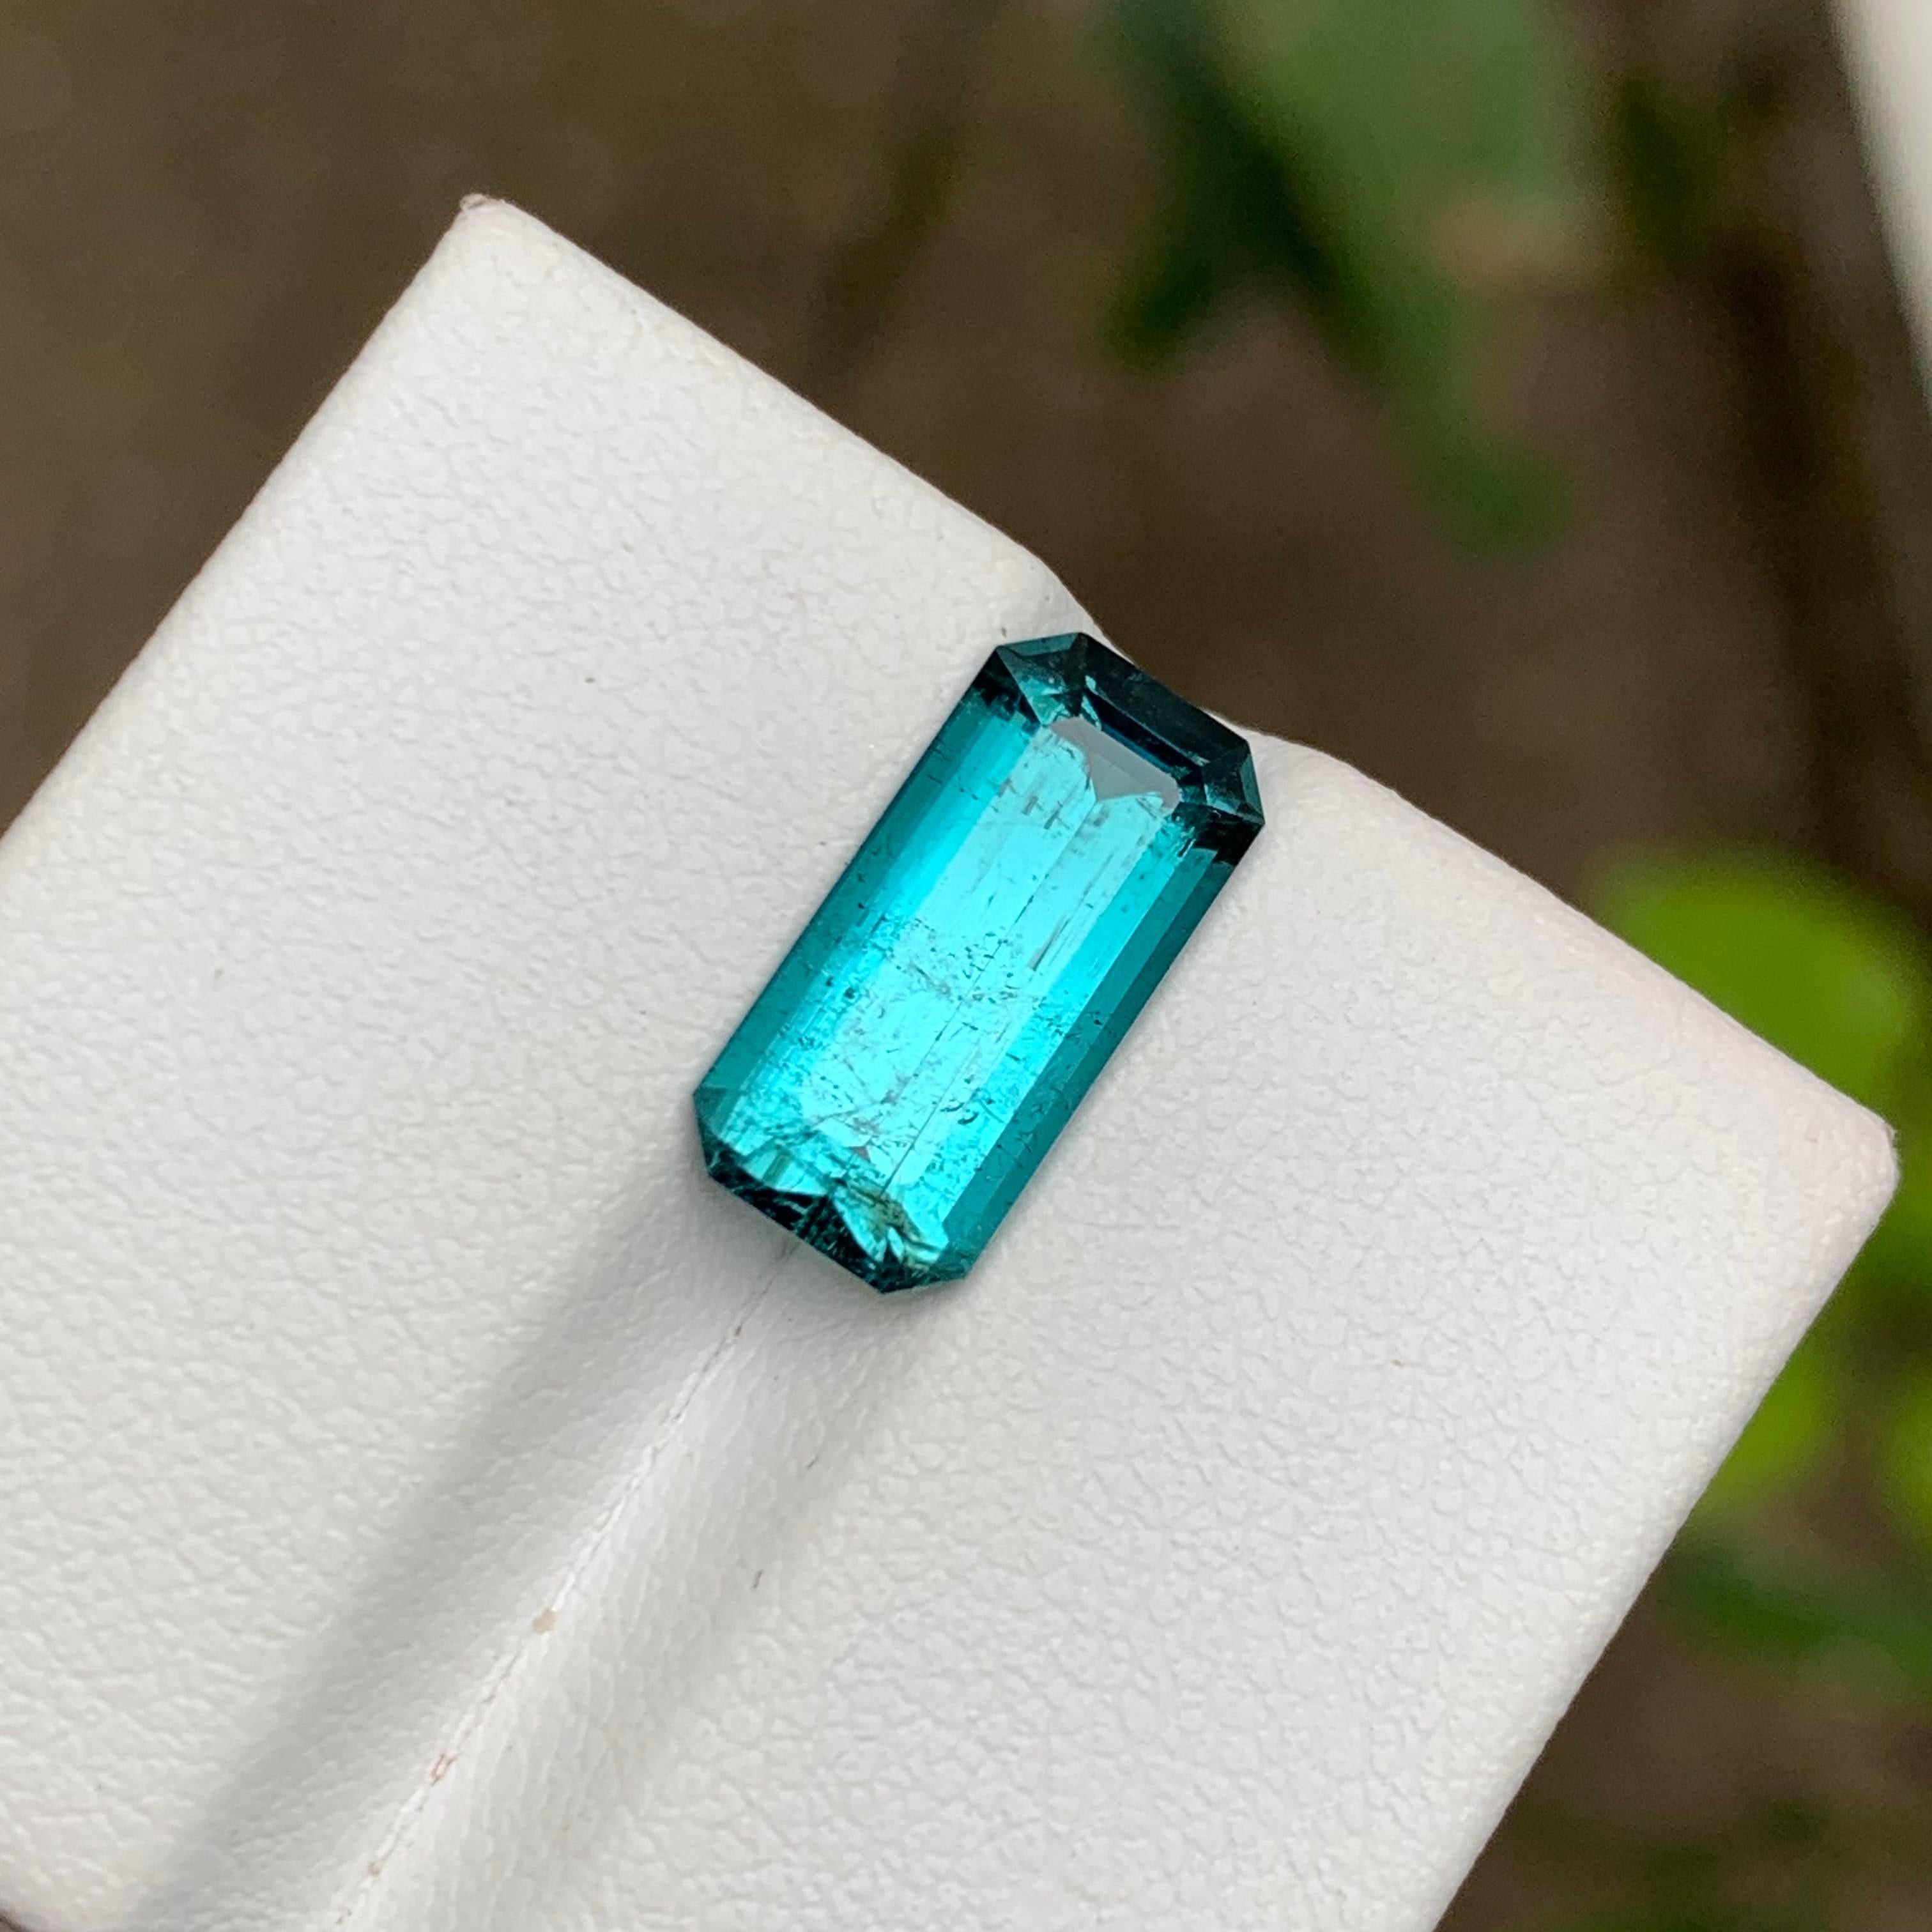 Rare Neon Blue Natural Tourmaline Gemstone, 4 Ct Emerald Cut for Ring/Jewelry AF For Sale 2